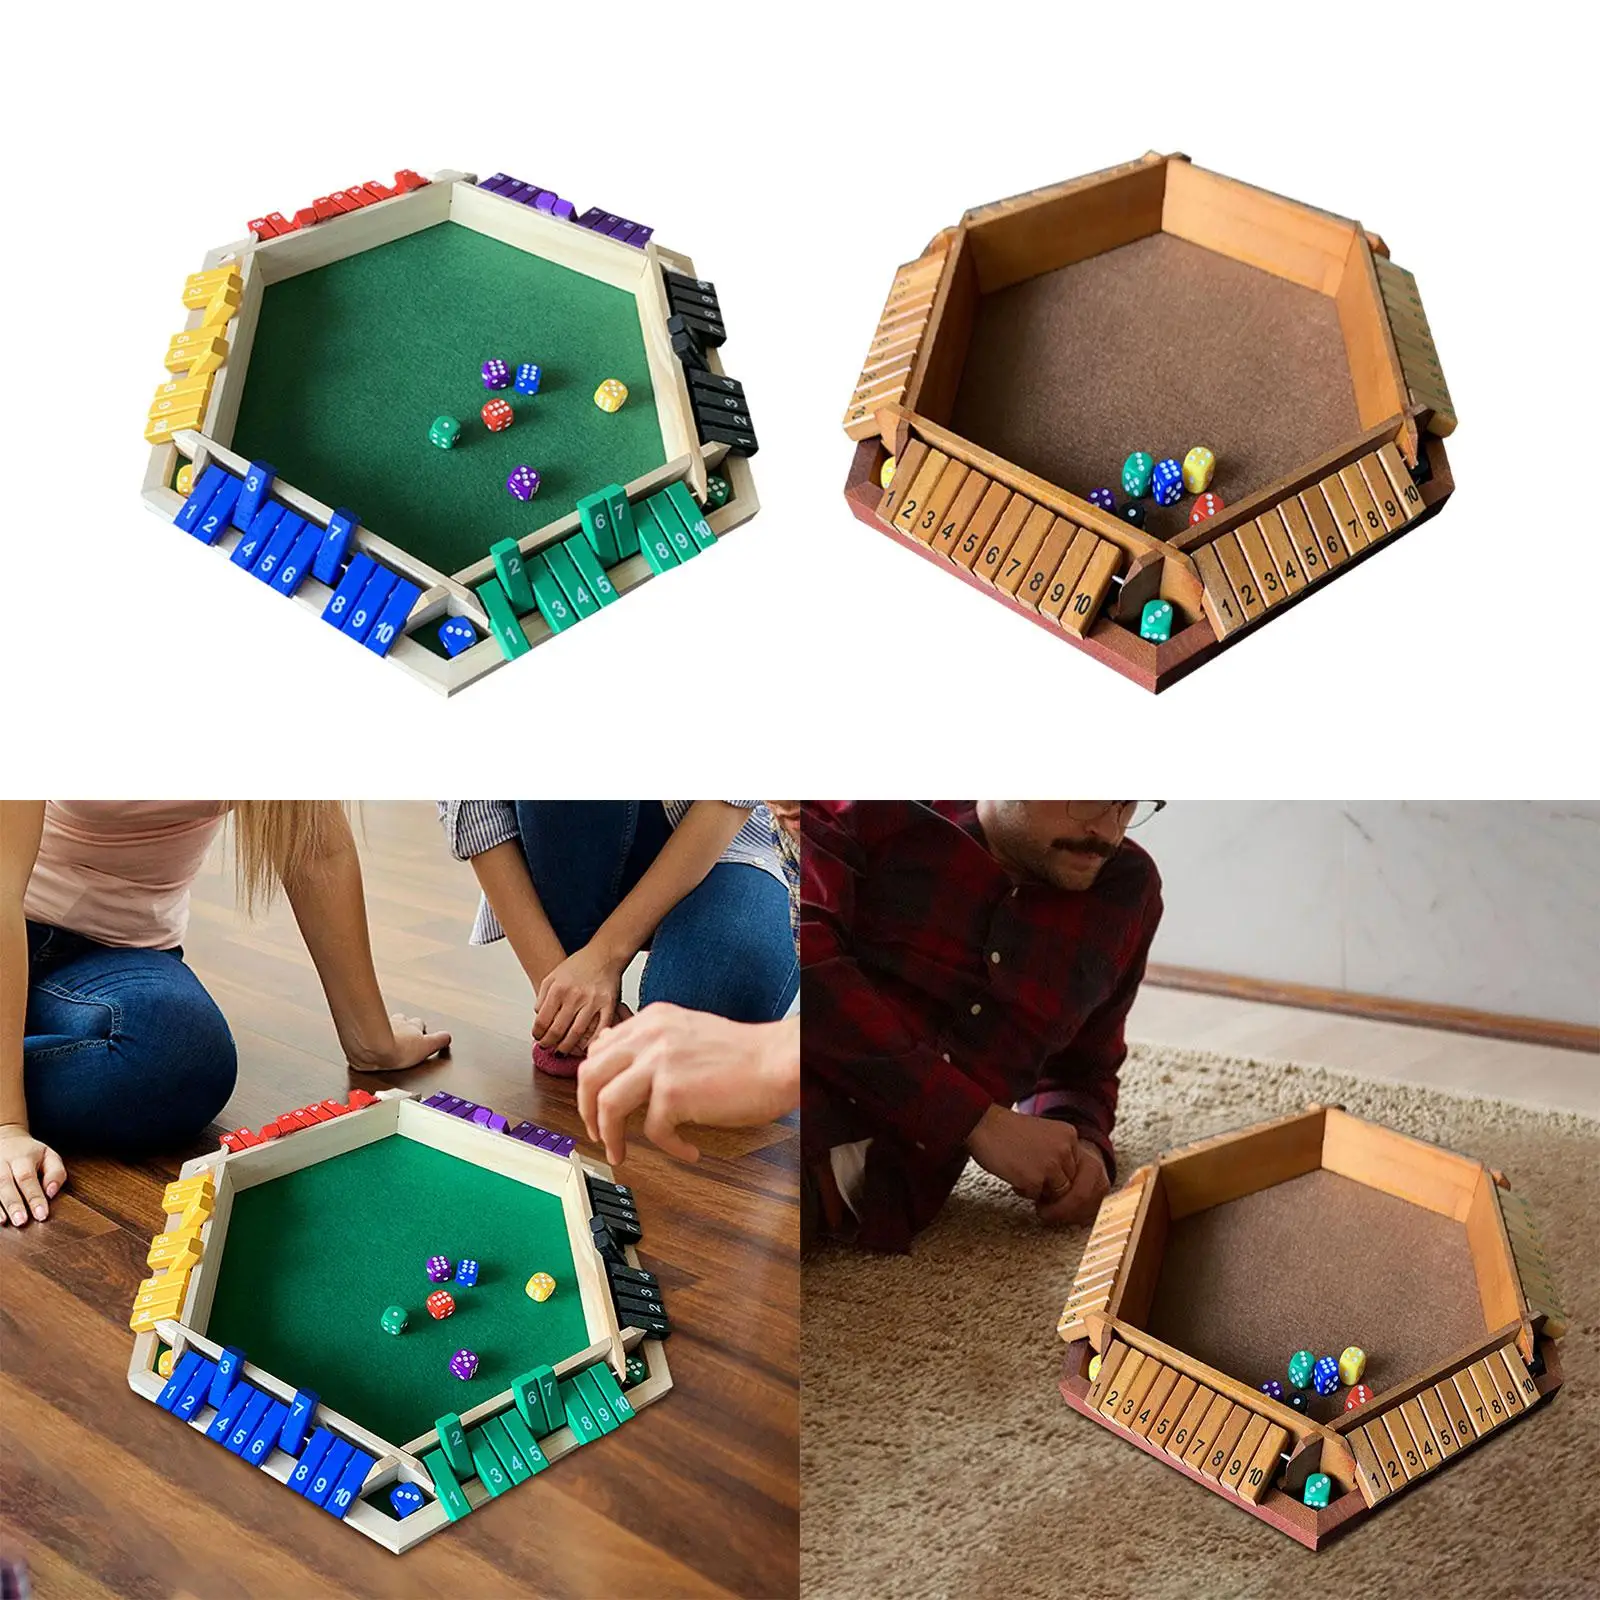 6 Ways Play Dice Games Math Game Club Drinking Games Family Game Table Board